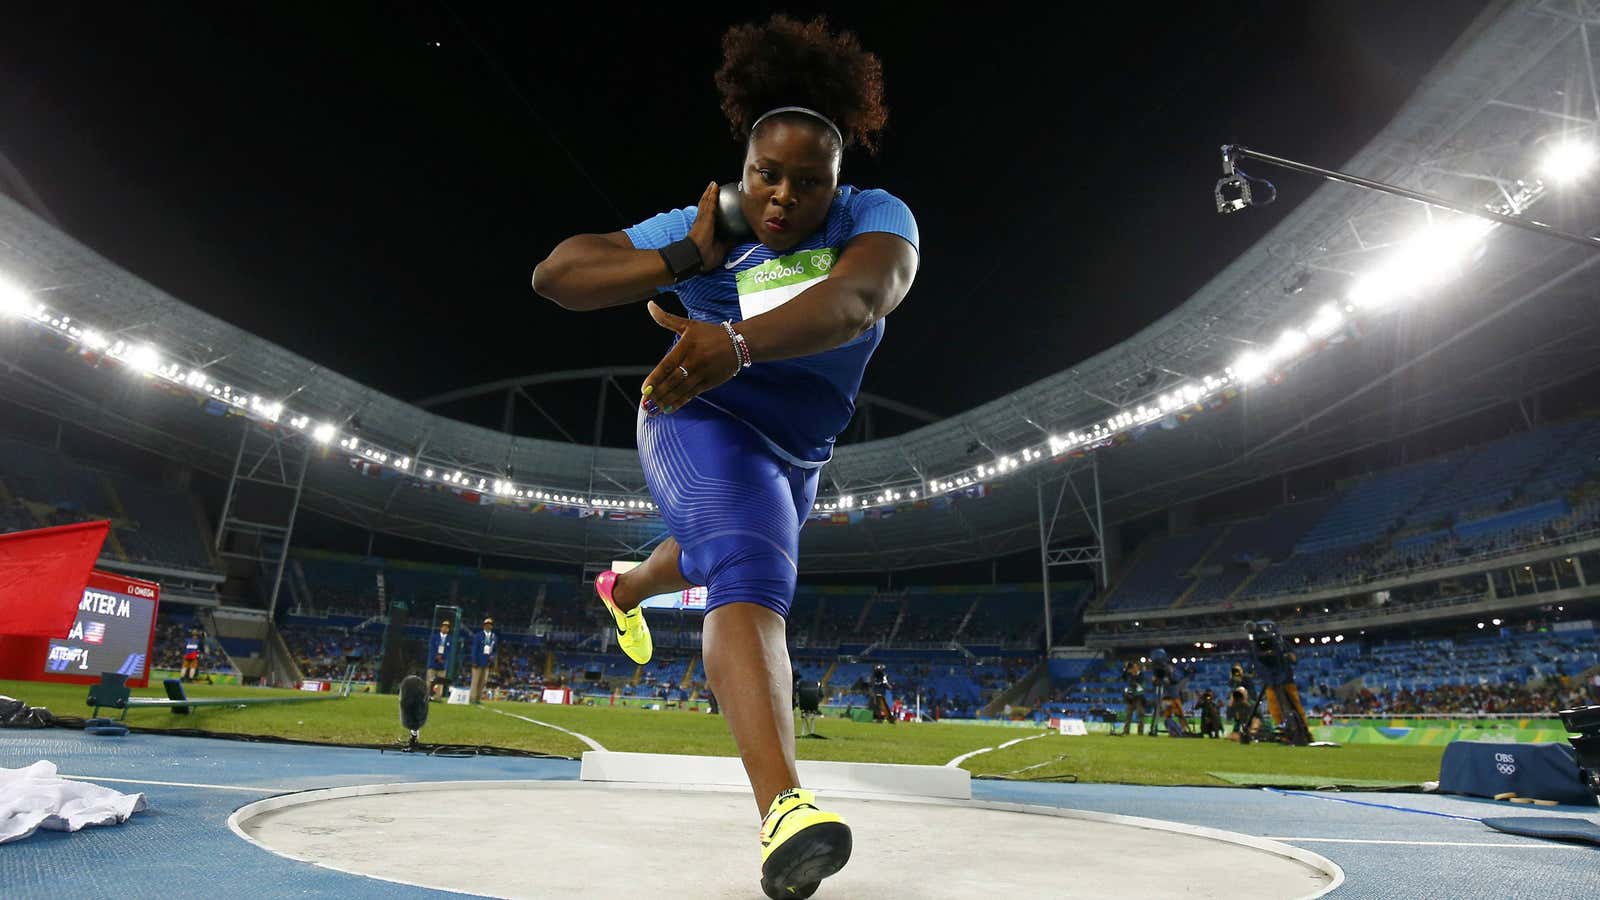 Michelle Carter just became the first American to win a gold medal in shot put.